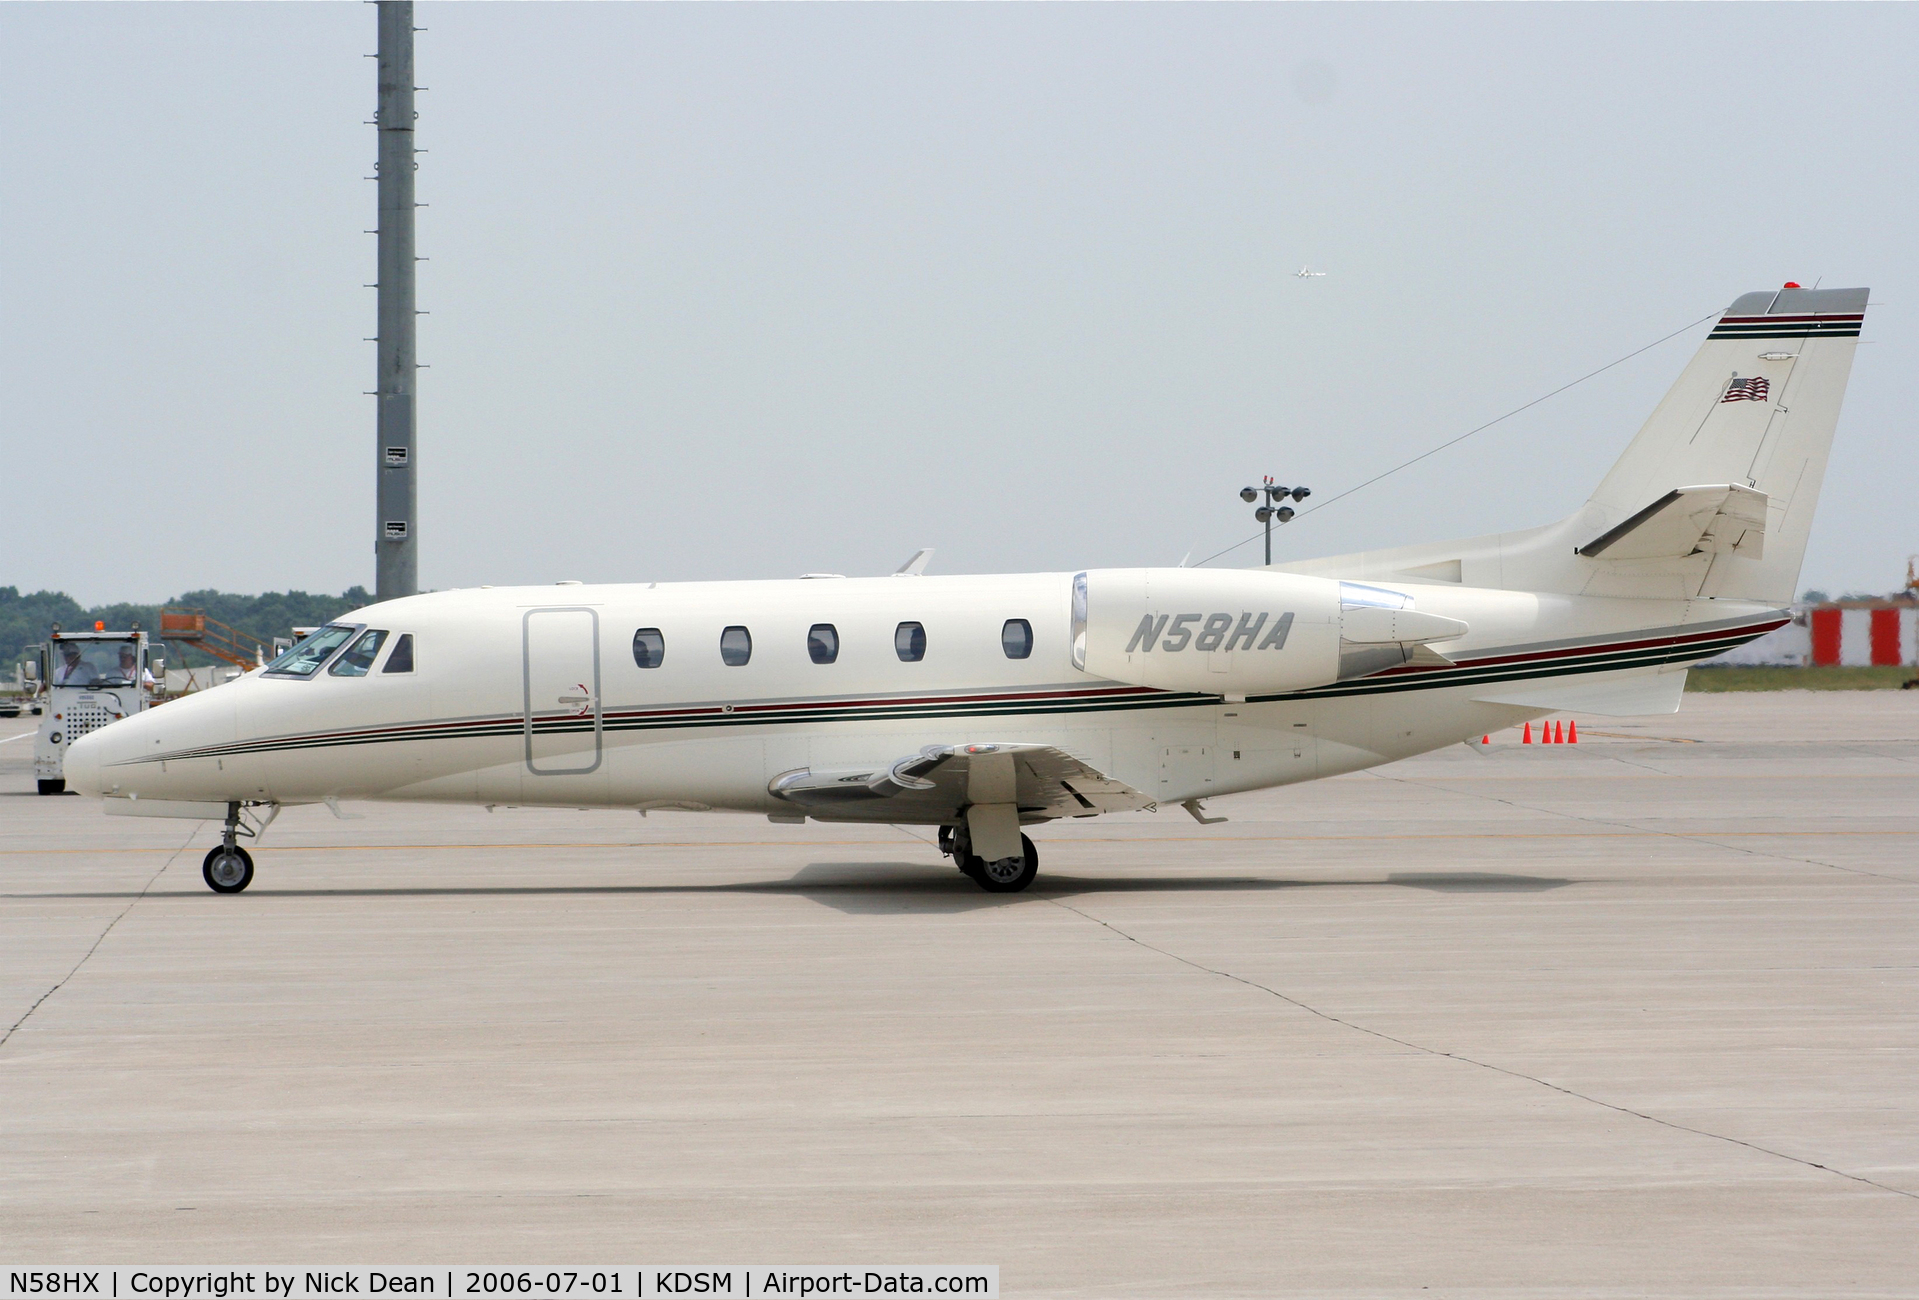 N58HX, 2000 Cessna 560XL C/N 560-5099, KDSM (Seen here as N58HA this airframe is currently registered N58HX as posted)